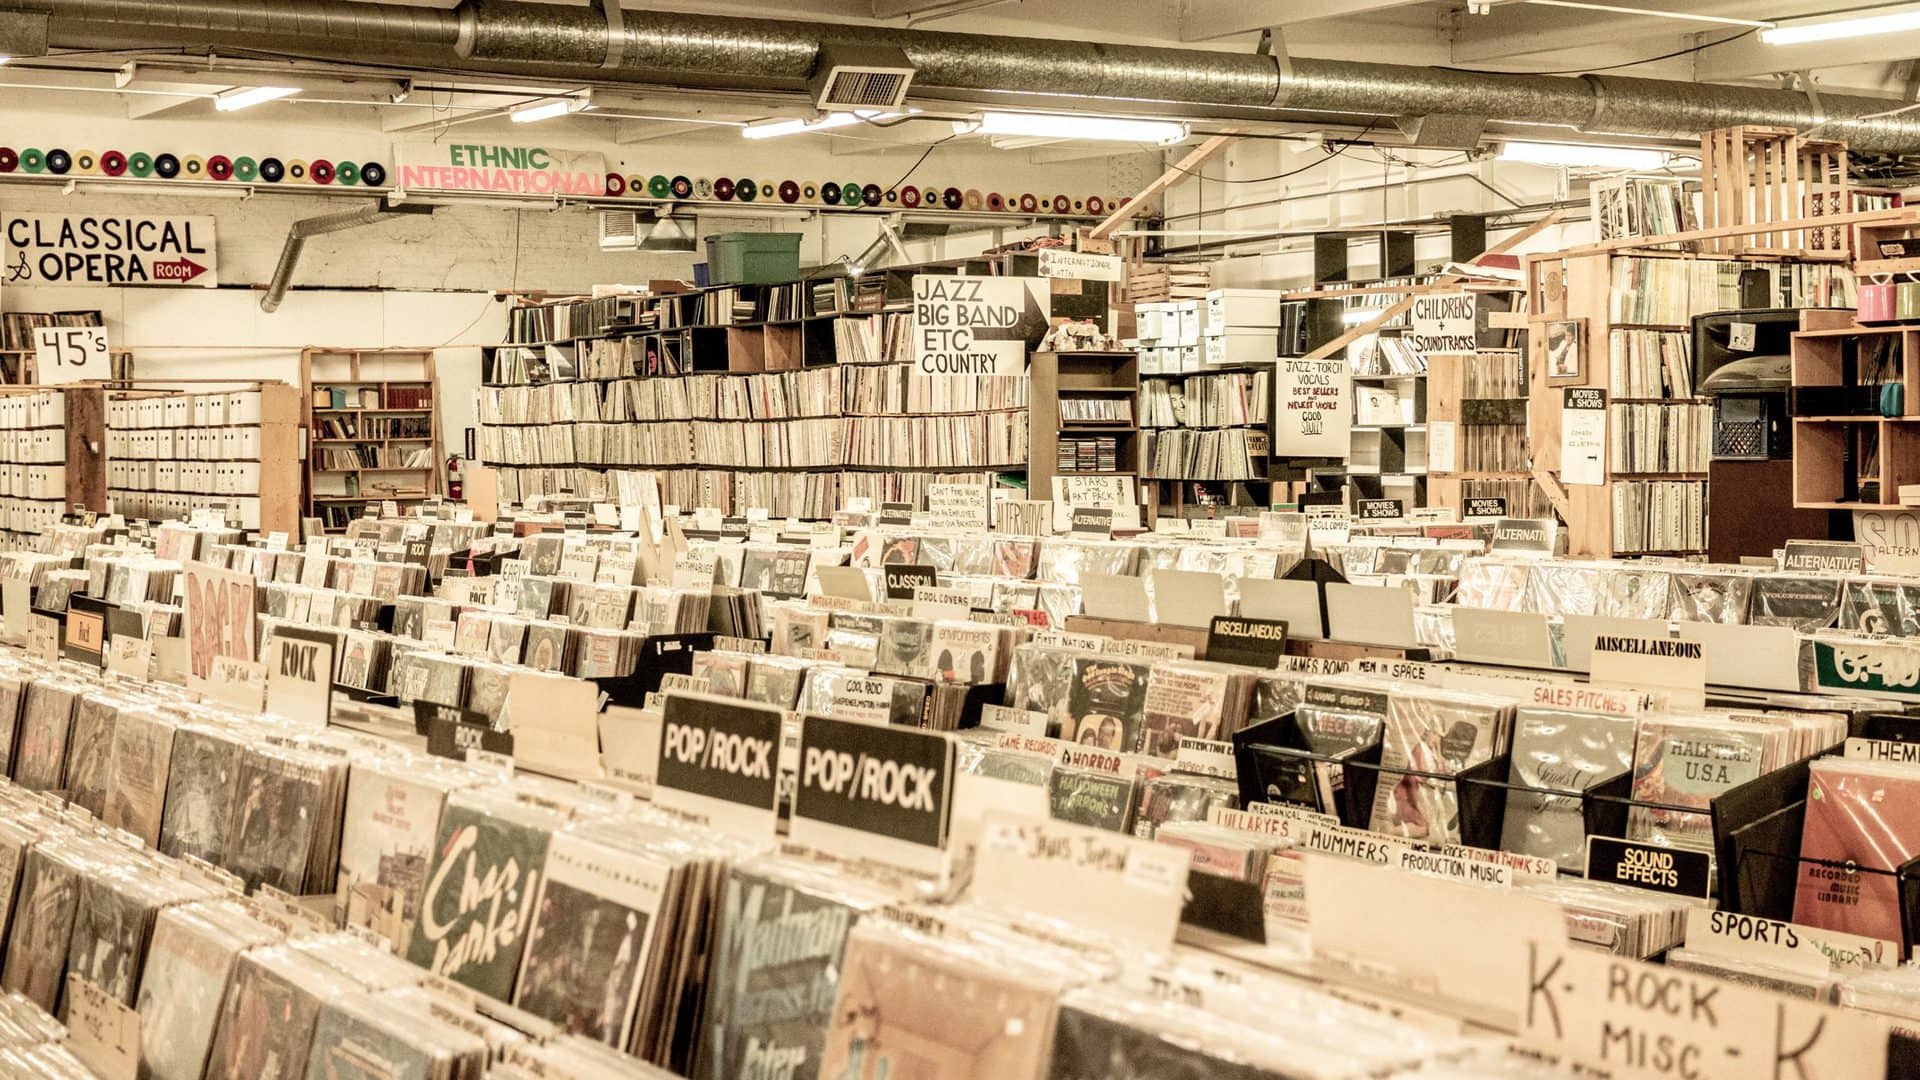 A record store likely full of DADGAD tuned songs